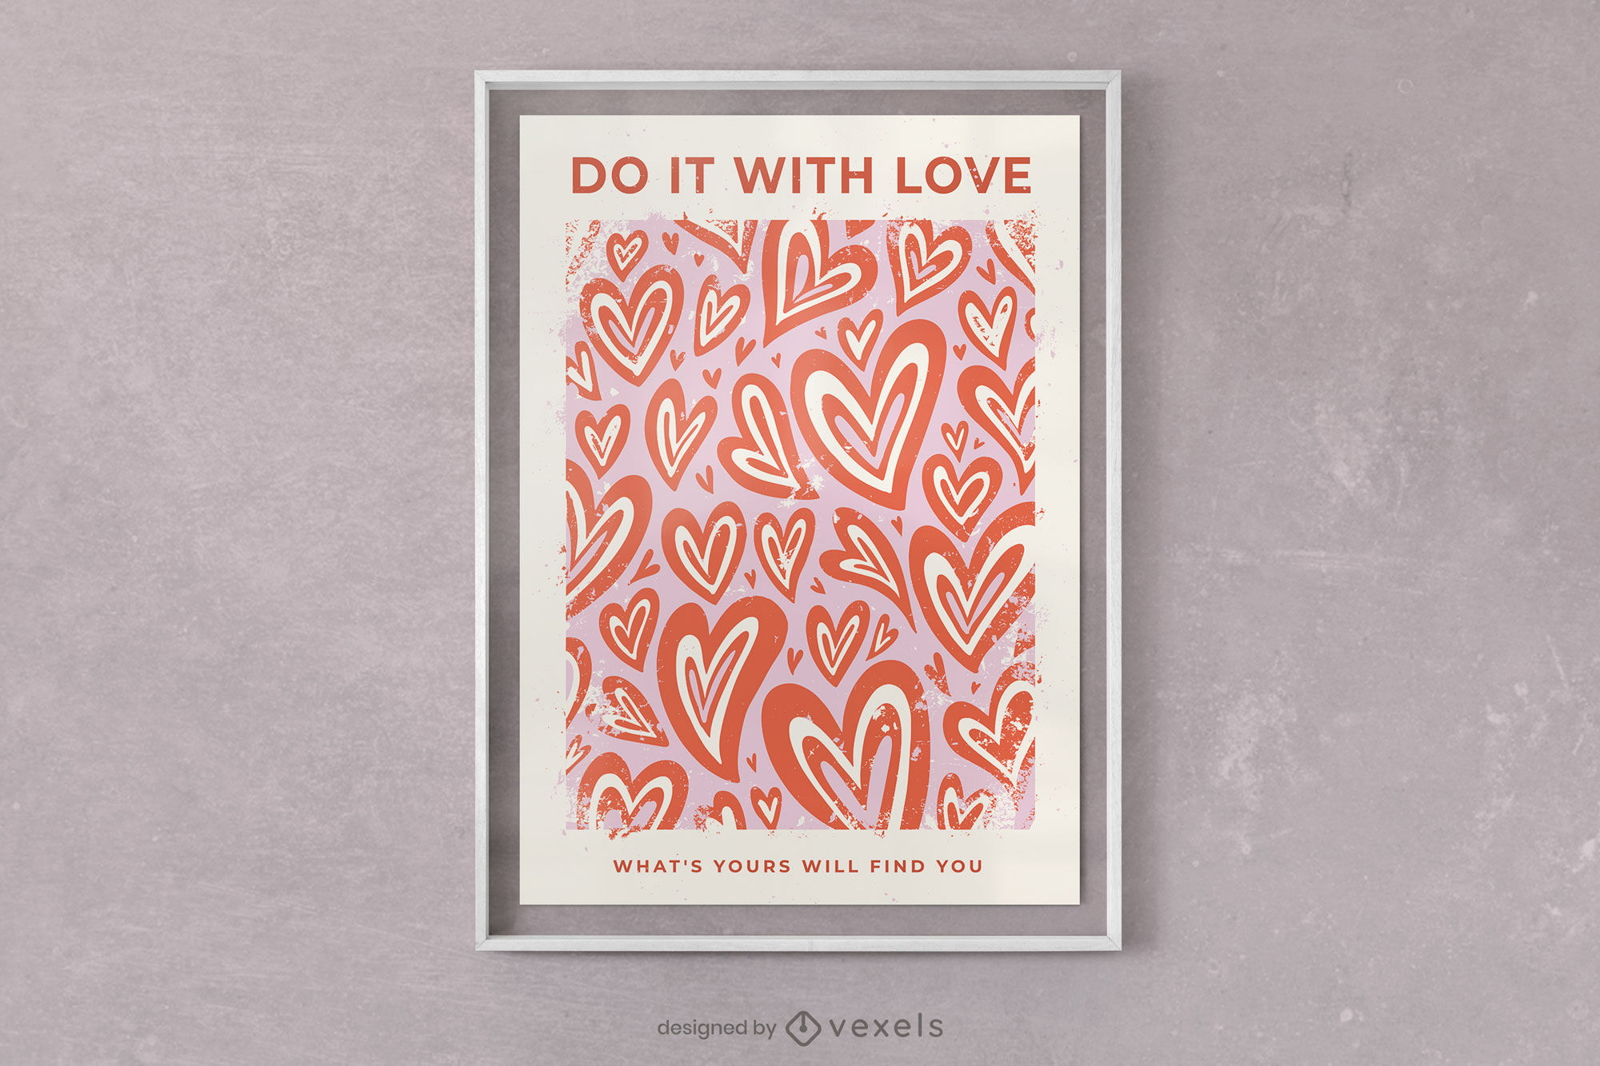 Love quote and hearts poster design